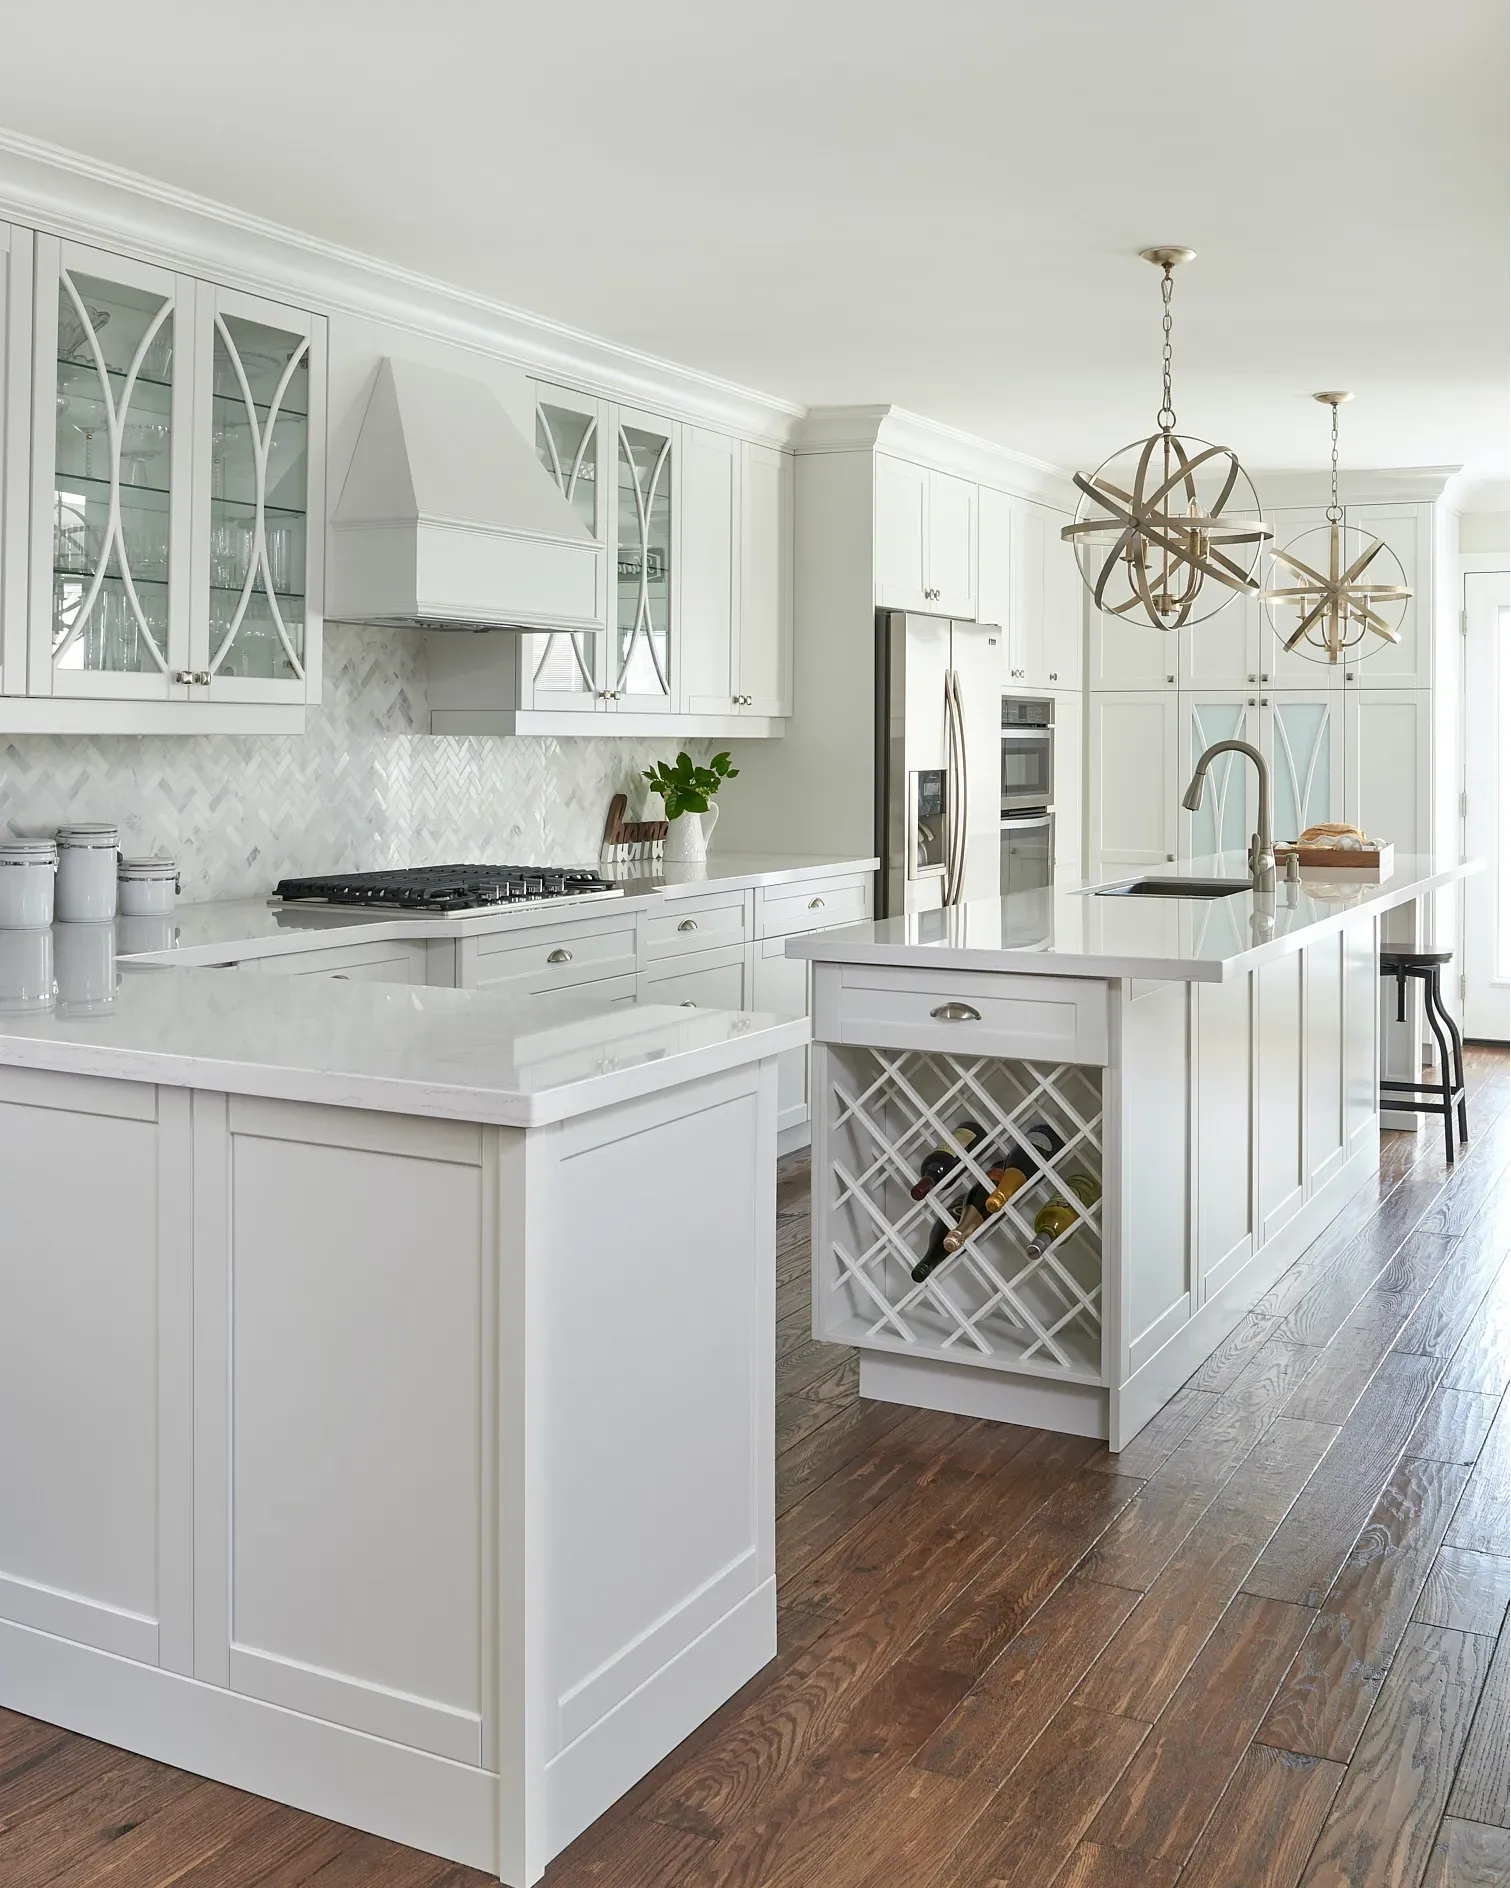 Benjamin Moore Oxford White victorian kitchen cabinets color paint